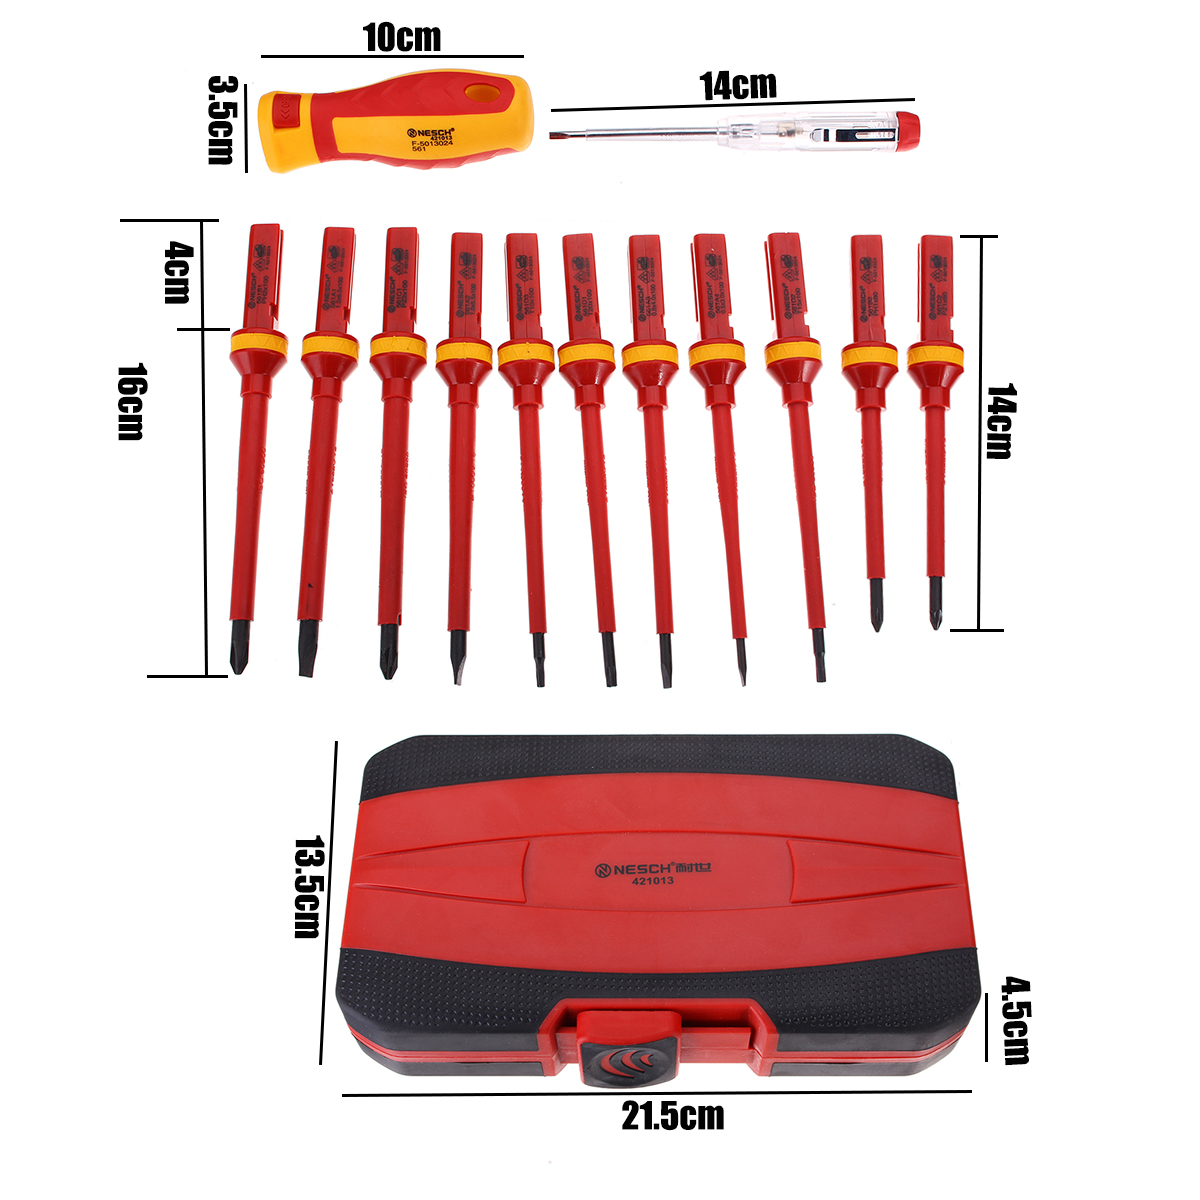 13Pcs-1000V-Electronic-Insulated-Screwdriver-Set-Phillips-Slotted-Torx-CR-V-Screwdriver-Hand-Tools-1224521-4